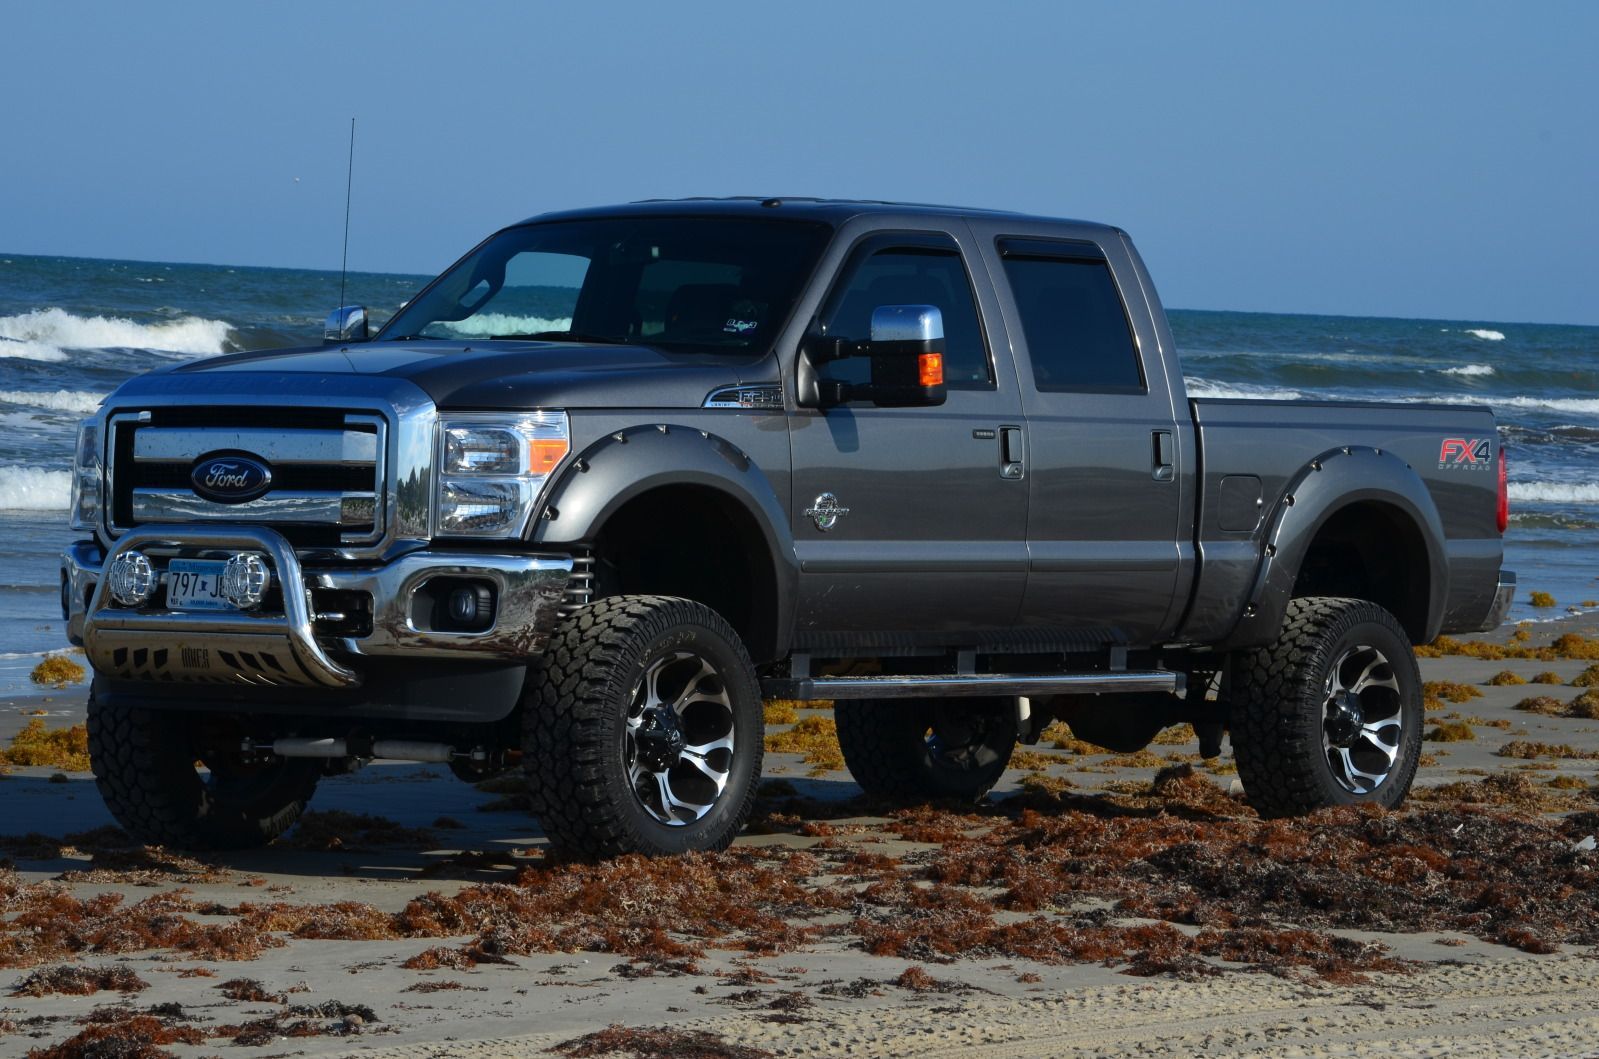 Lifted Truck Wallpapers Related Keywords & Suggestions.